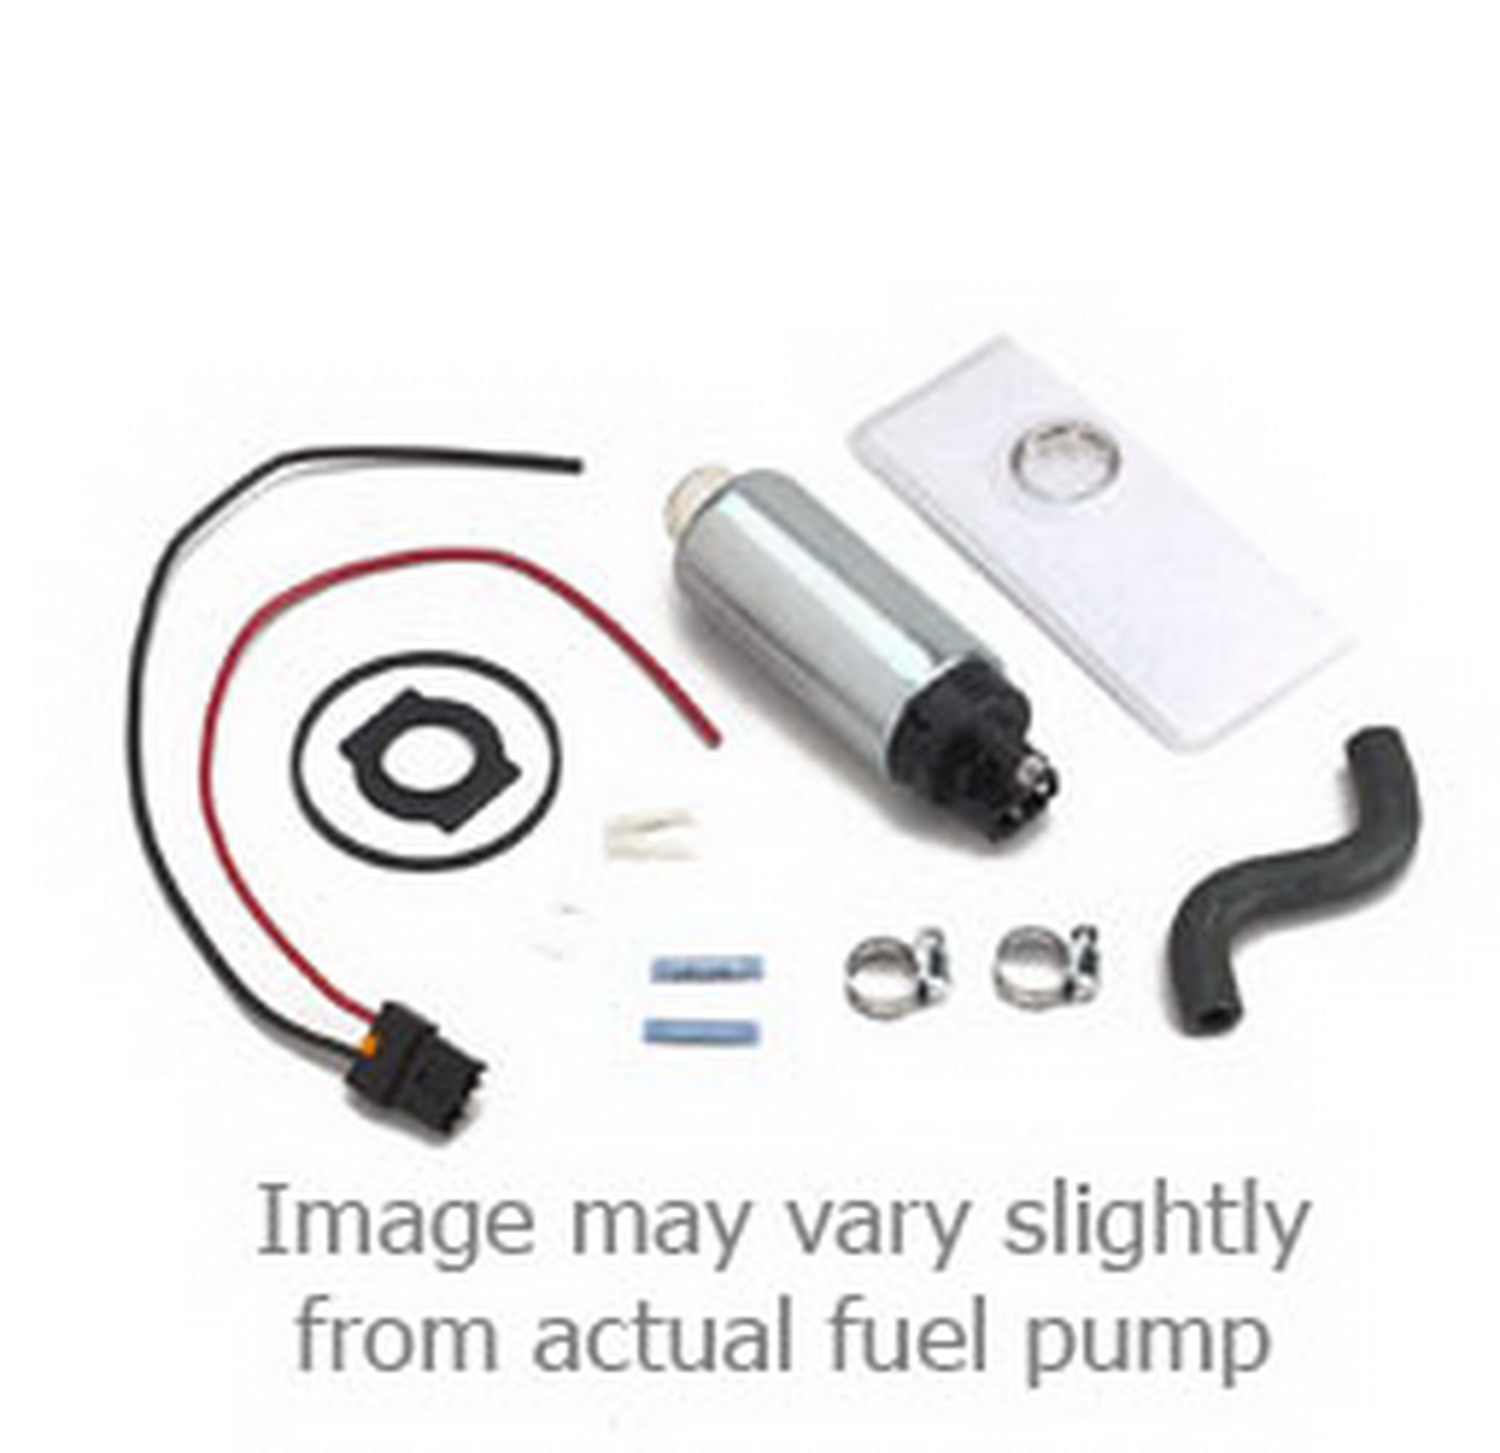 Holley Performance Holley Performance 12-901 Electric Fuel Pump; In-Tank Electric Fuel Pump